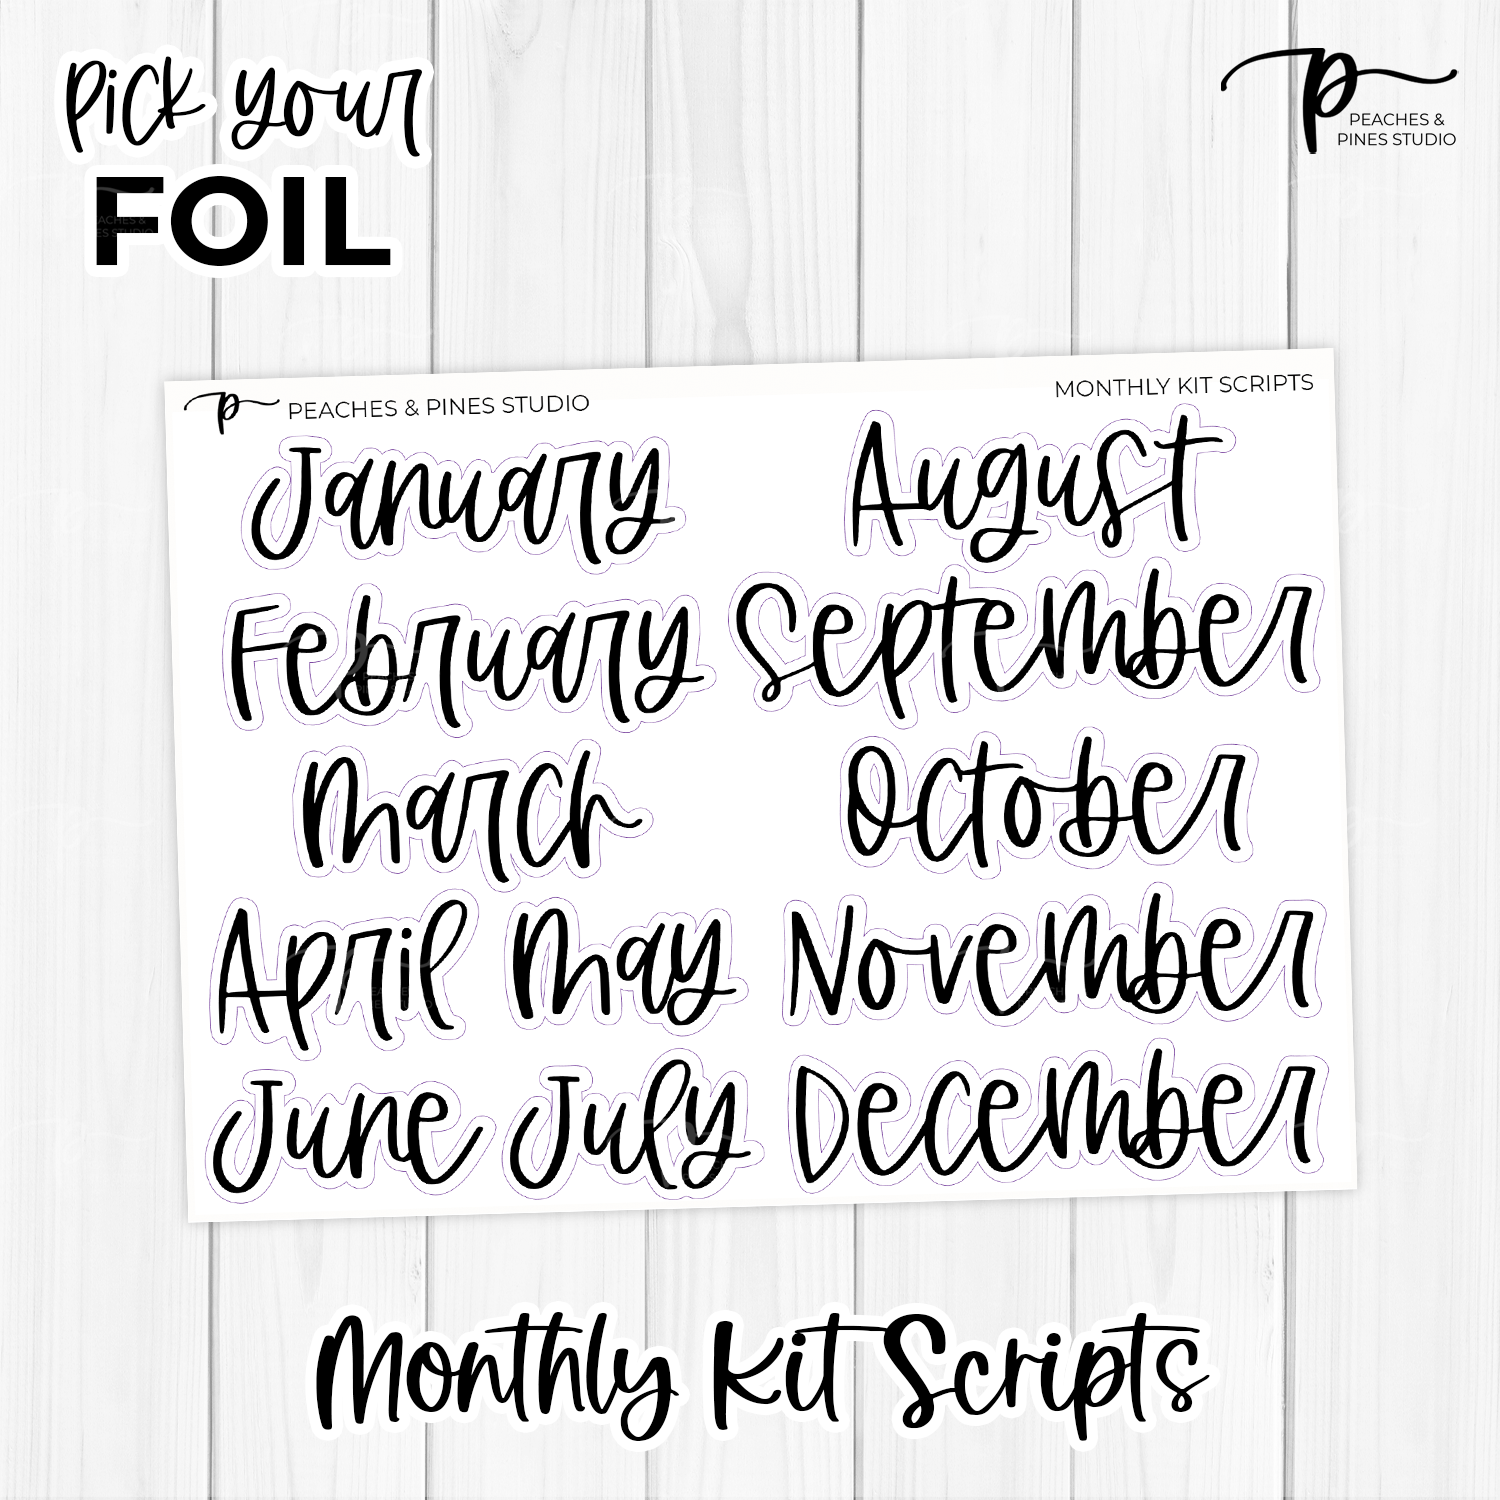 Monthly Kit Scripts - Foiled Scripts